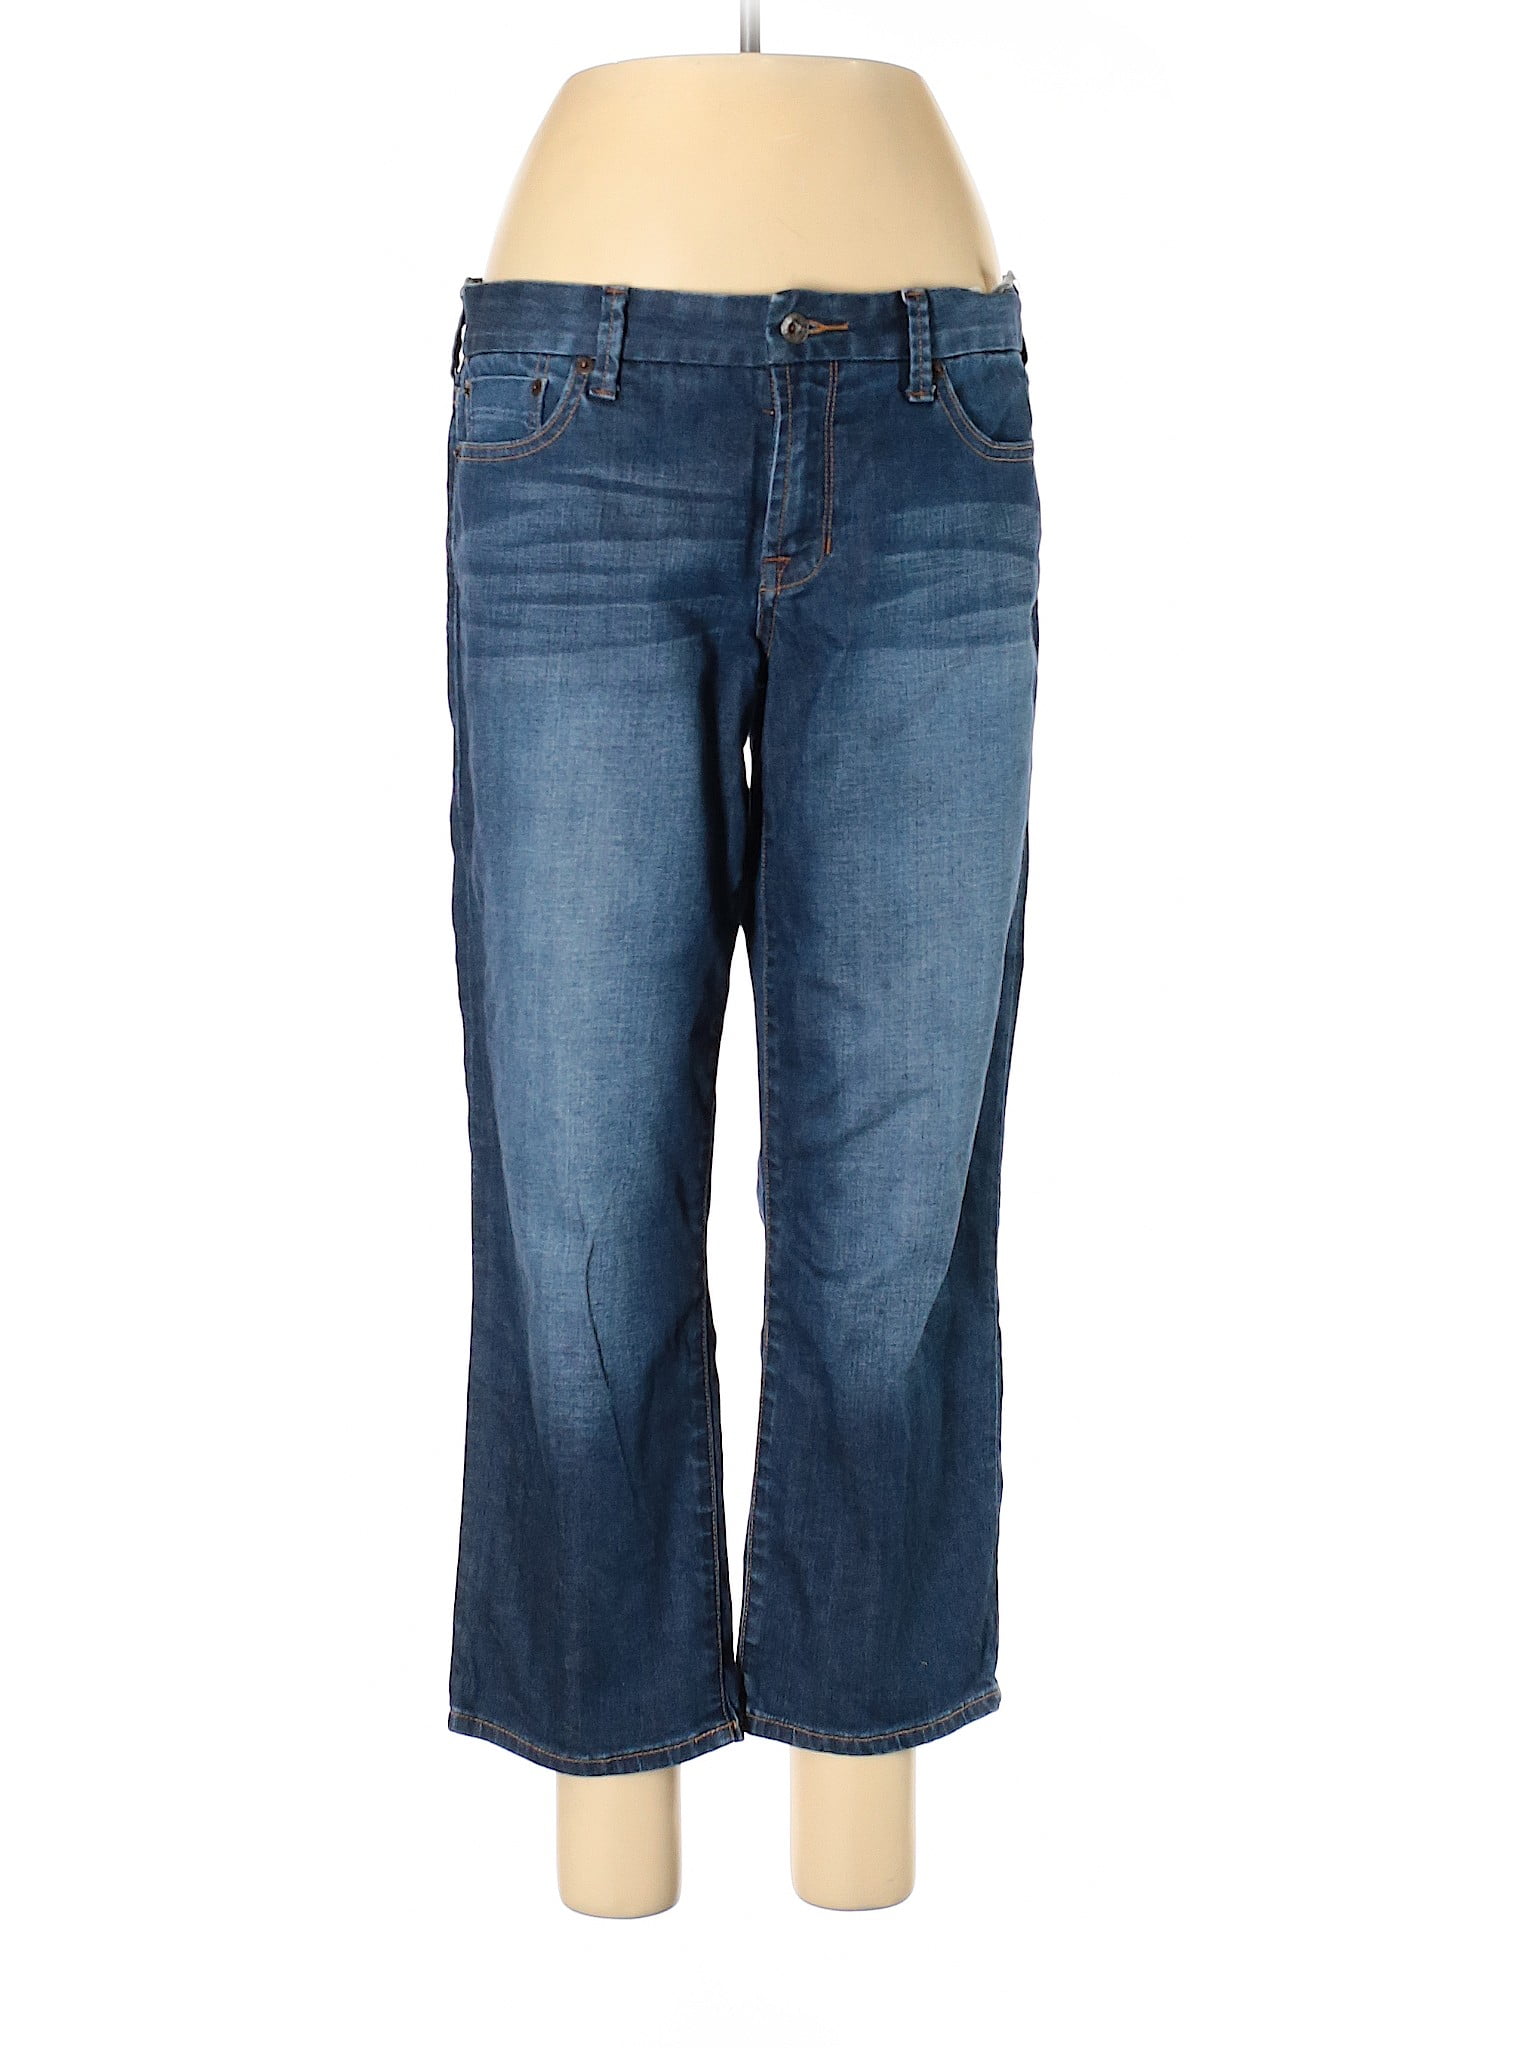 Lucky Brand - Pre-Owned Lucky Brand Women's Size 10 Jeans - Walmart.com ...